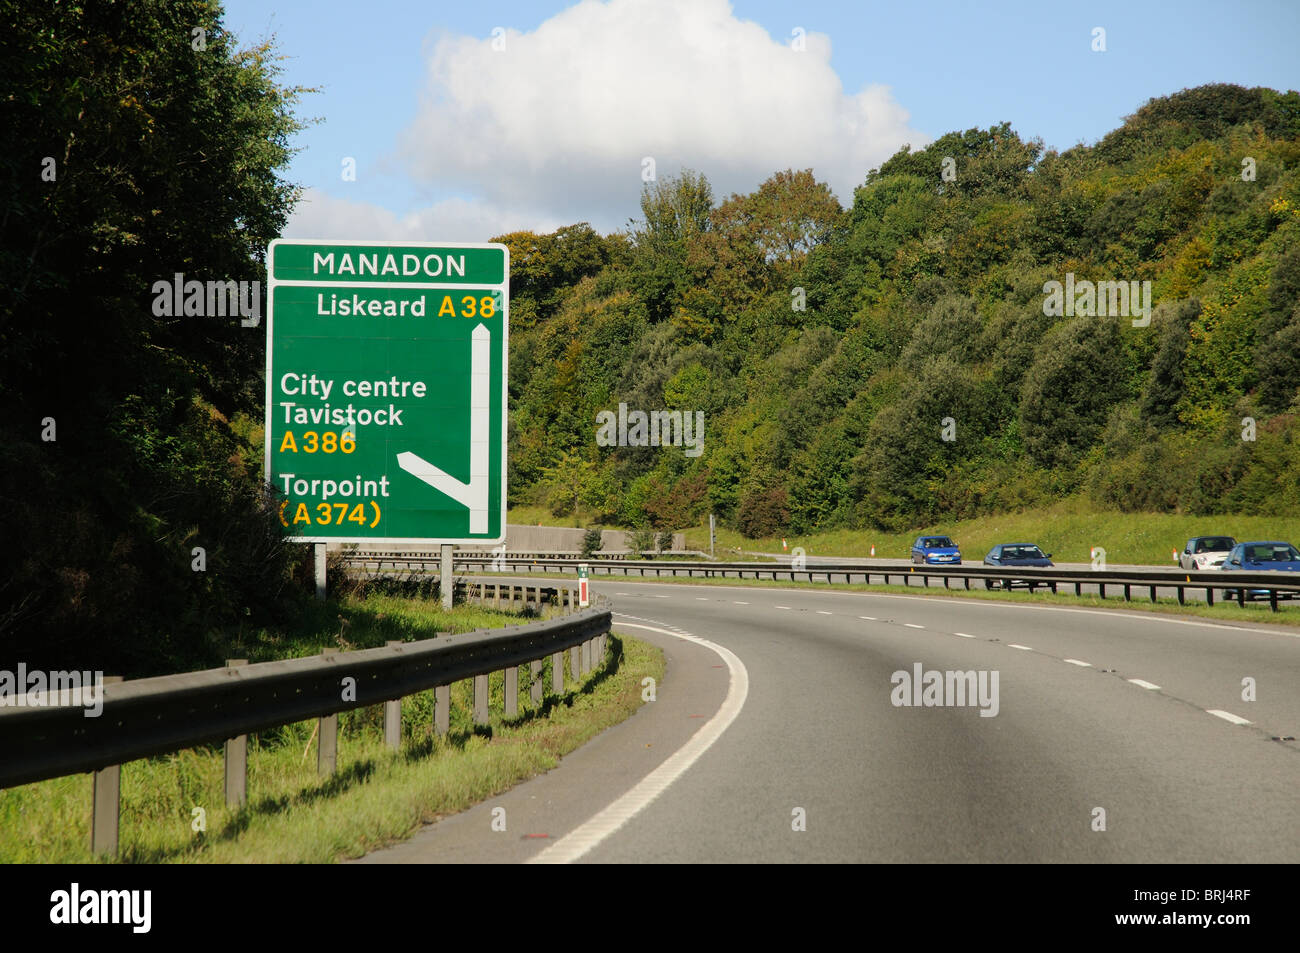 The A38 trunk road Devon Expressway as it heads around Plymouth towards Cornwall England UK Stock Photo